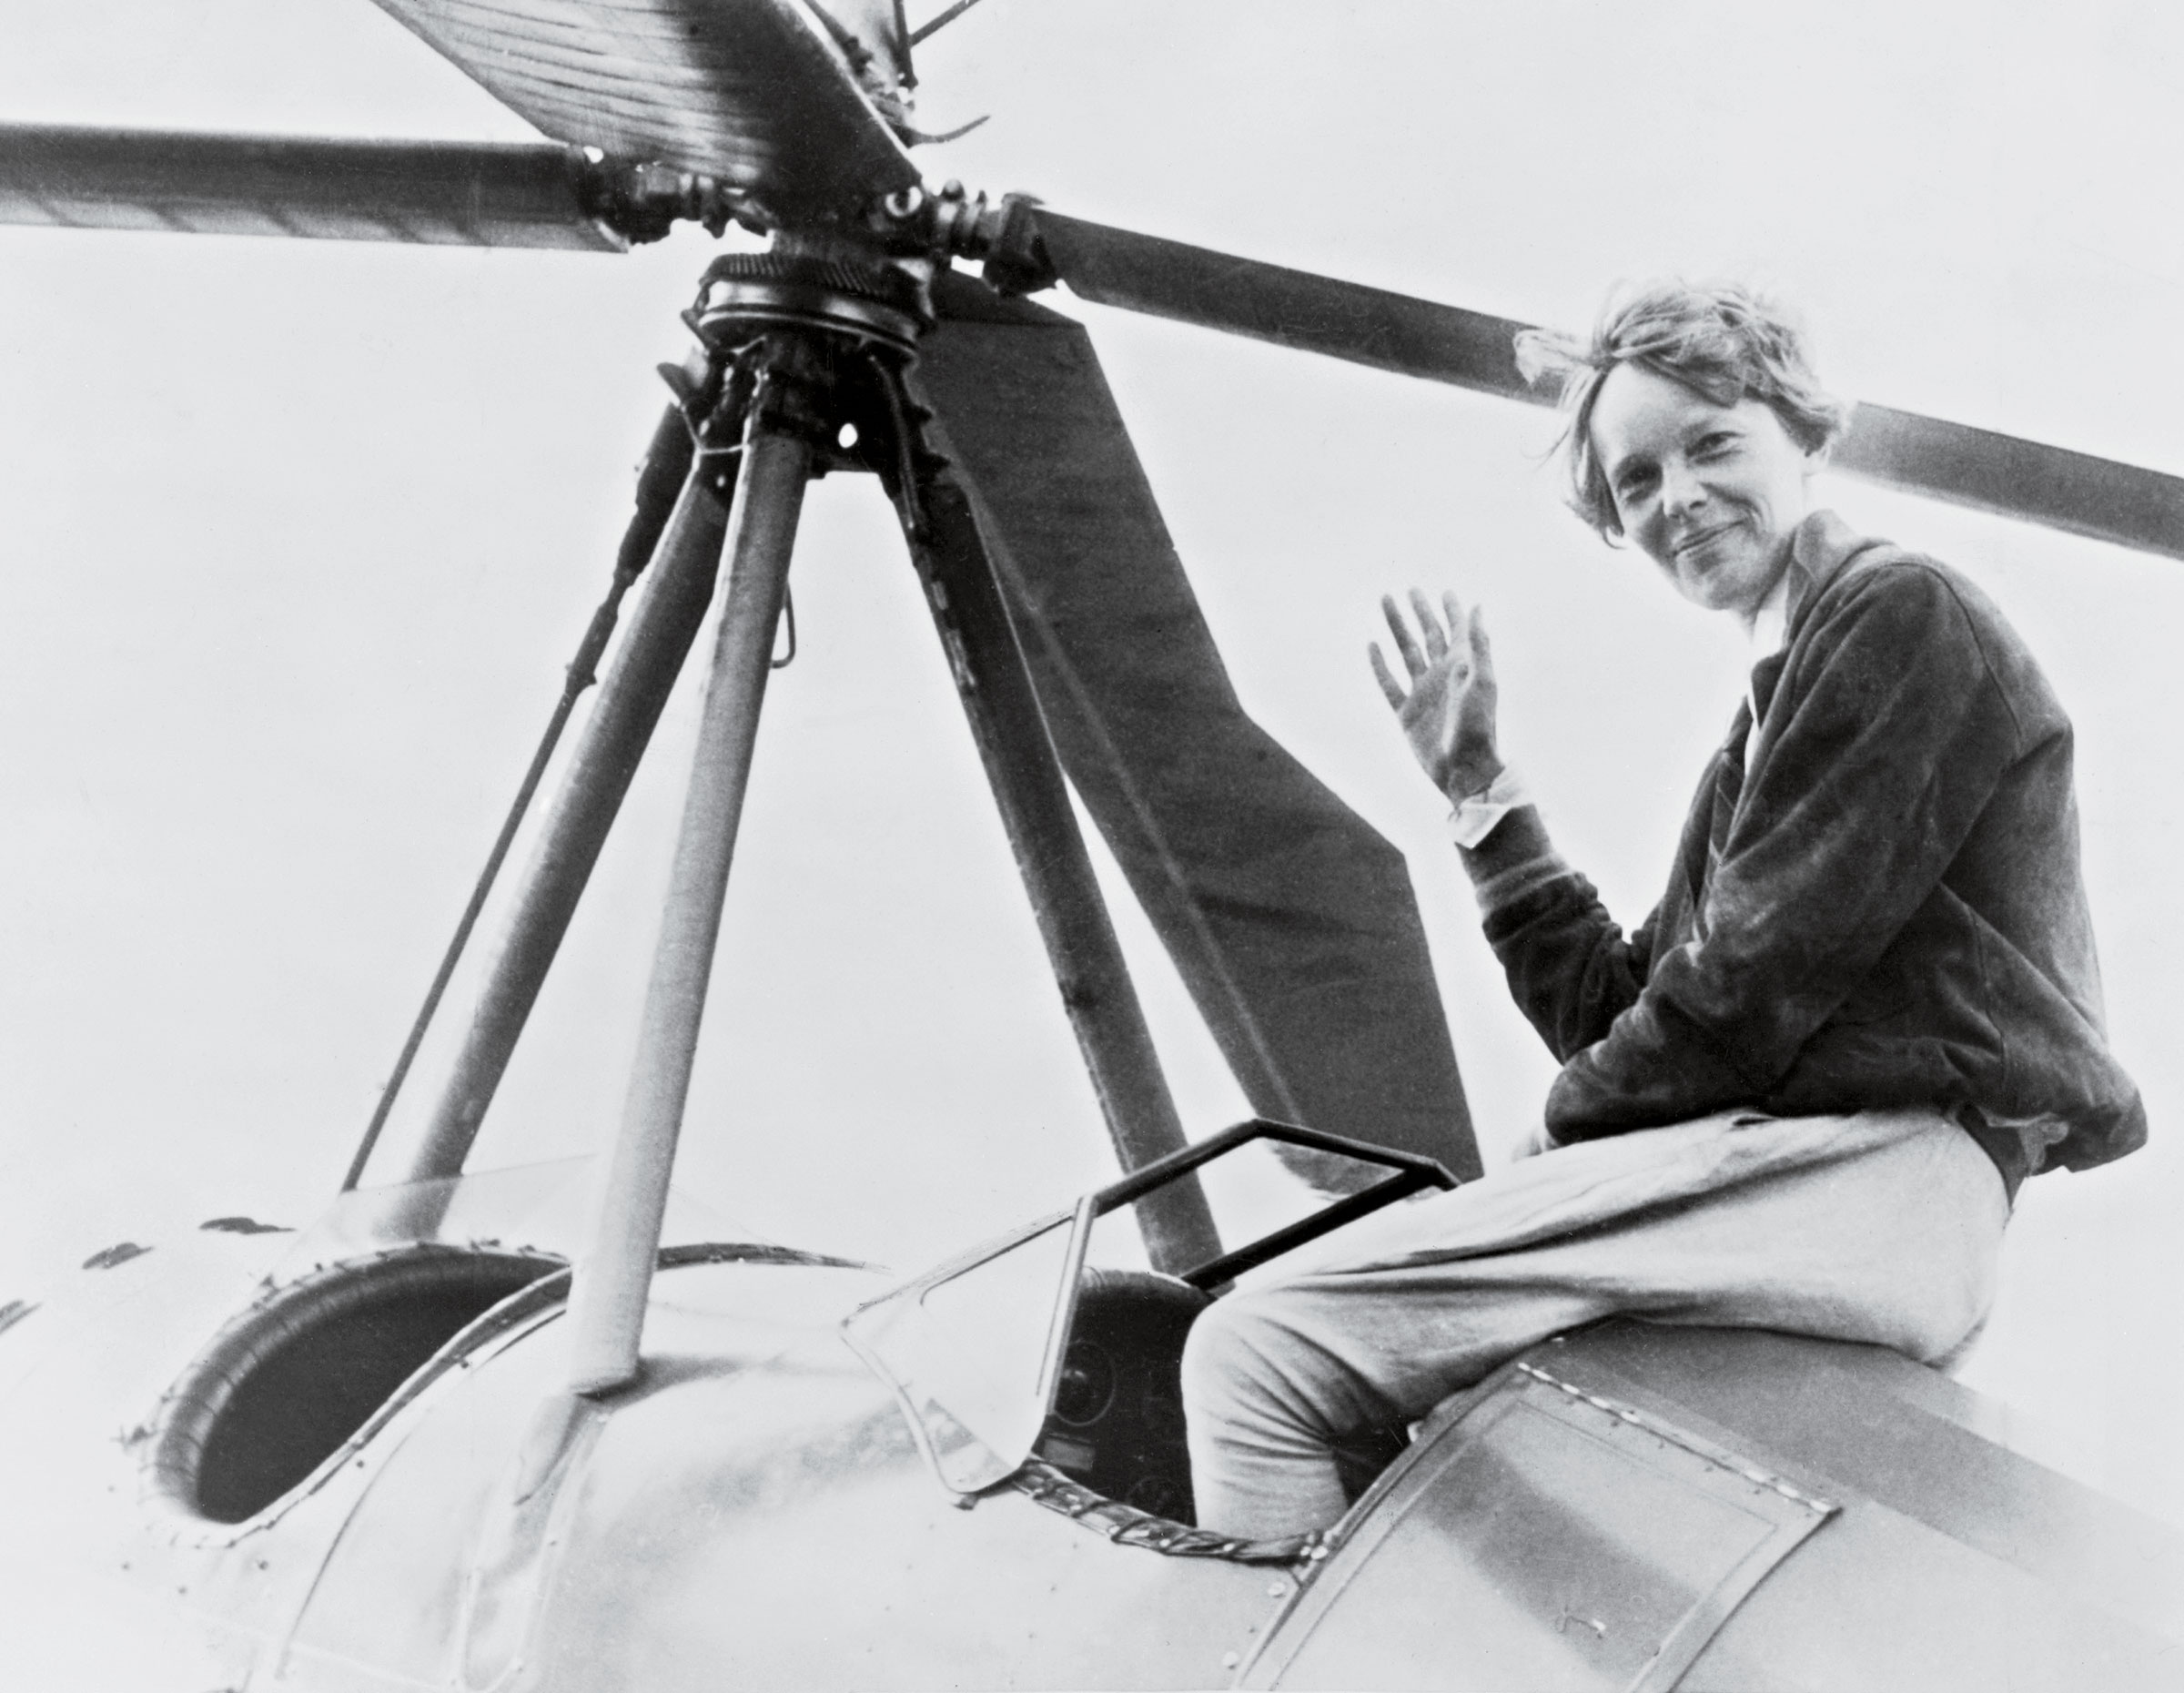 Amelia Earhart shortly after she became the first woman to complete a solo coast-to-coast flight, August 1932. (Everett)